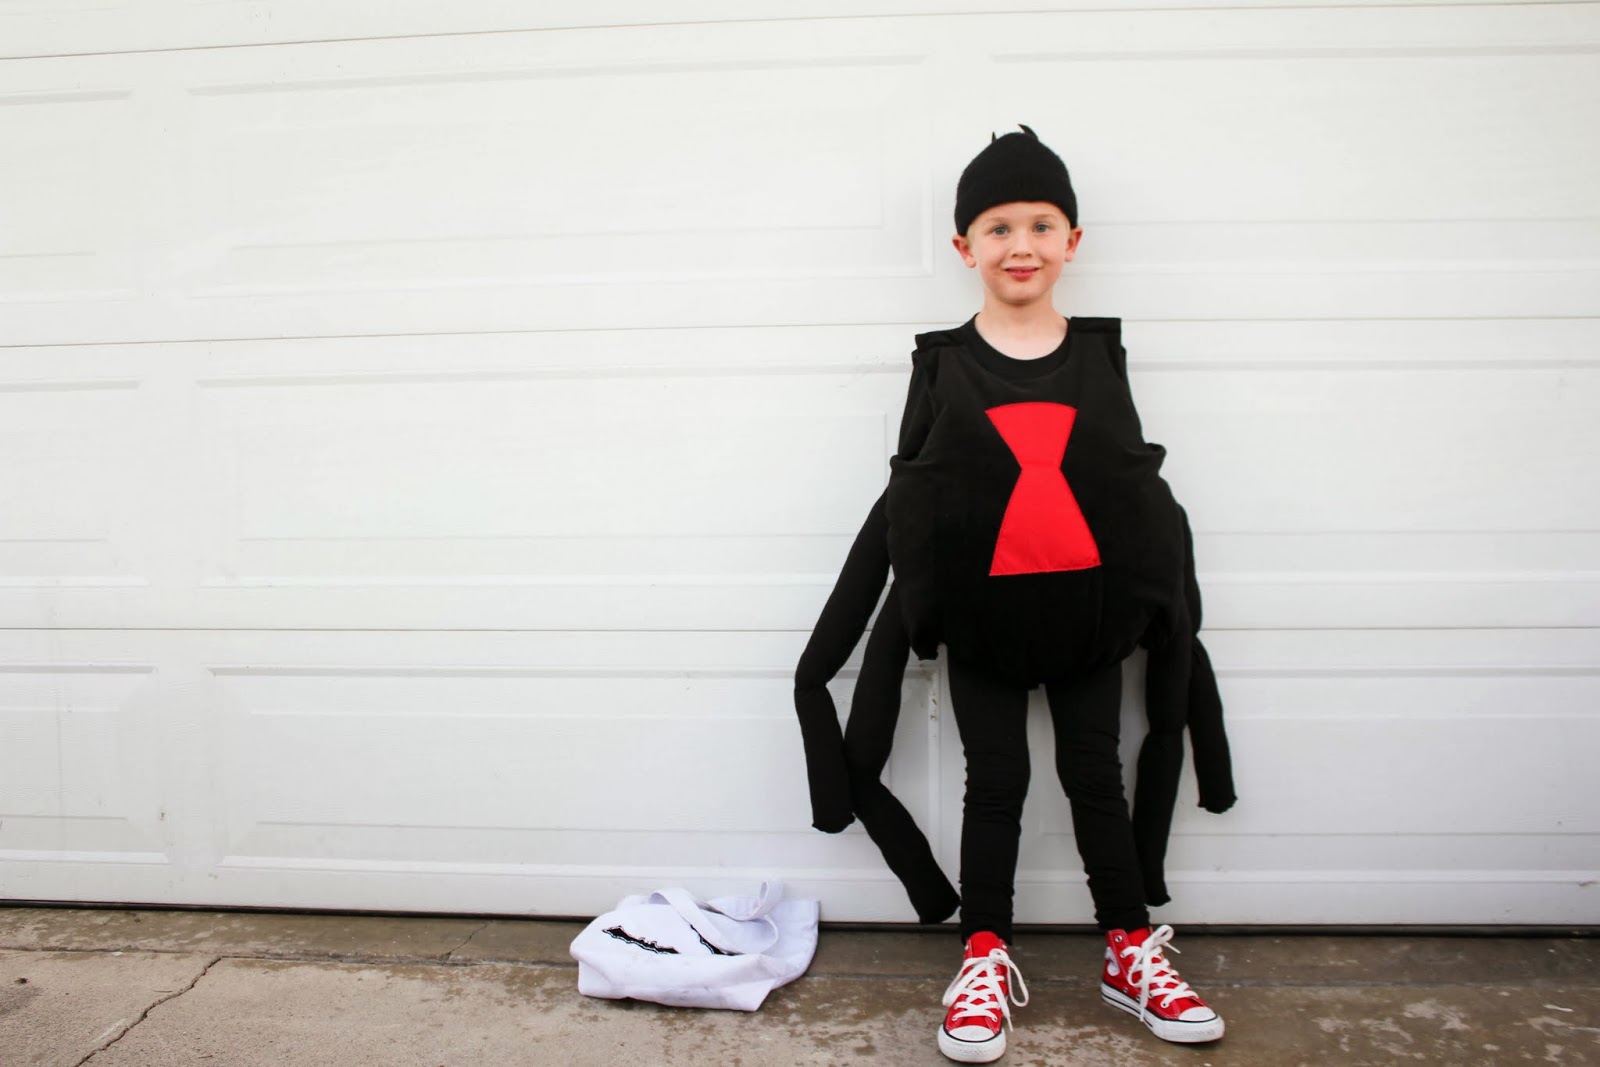 A little of this: The cutest black widow in town ...